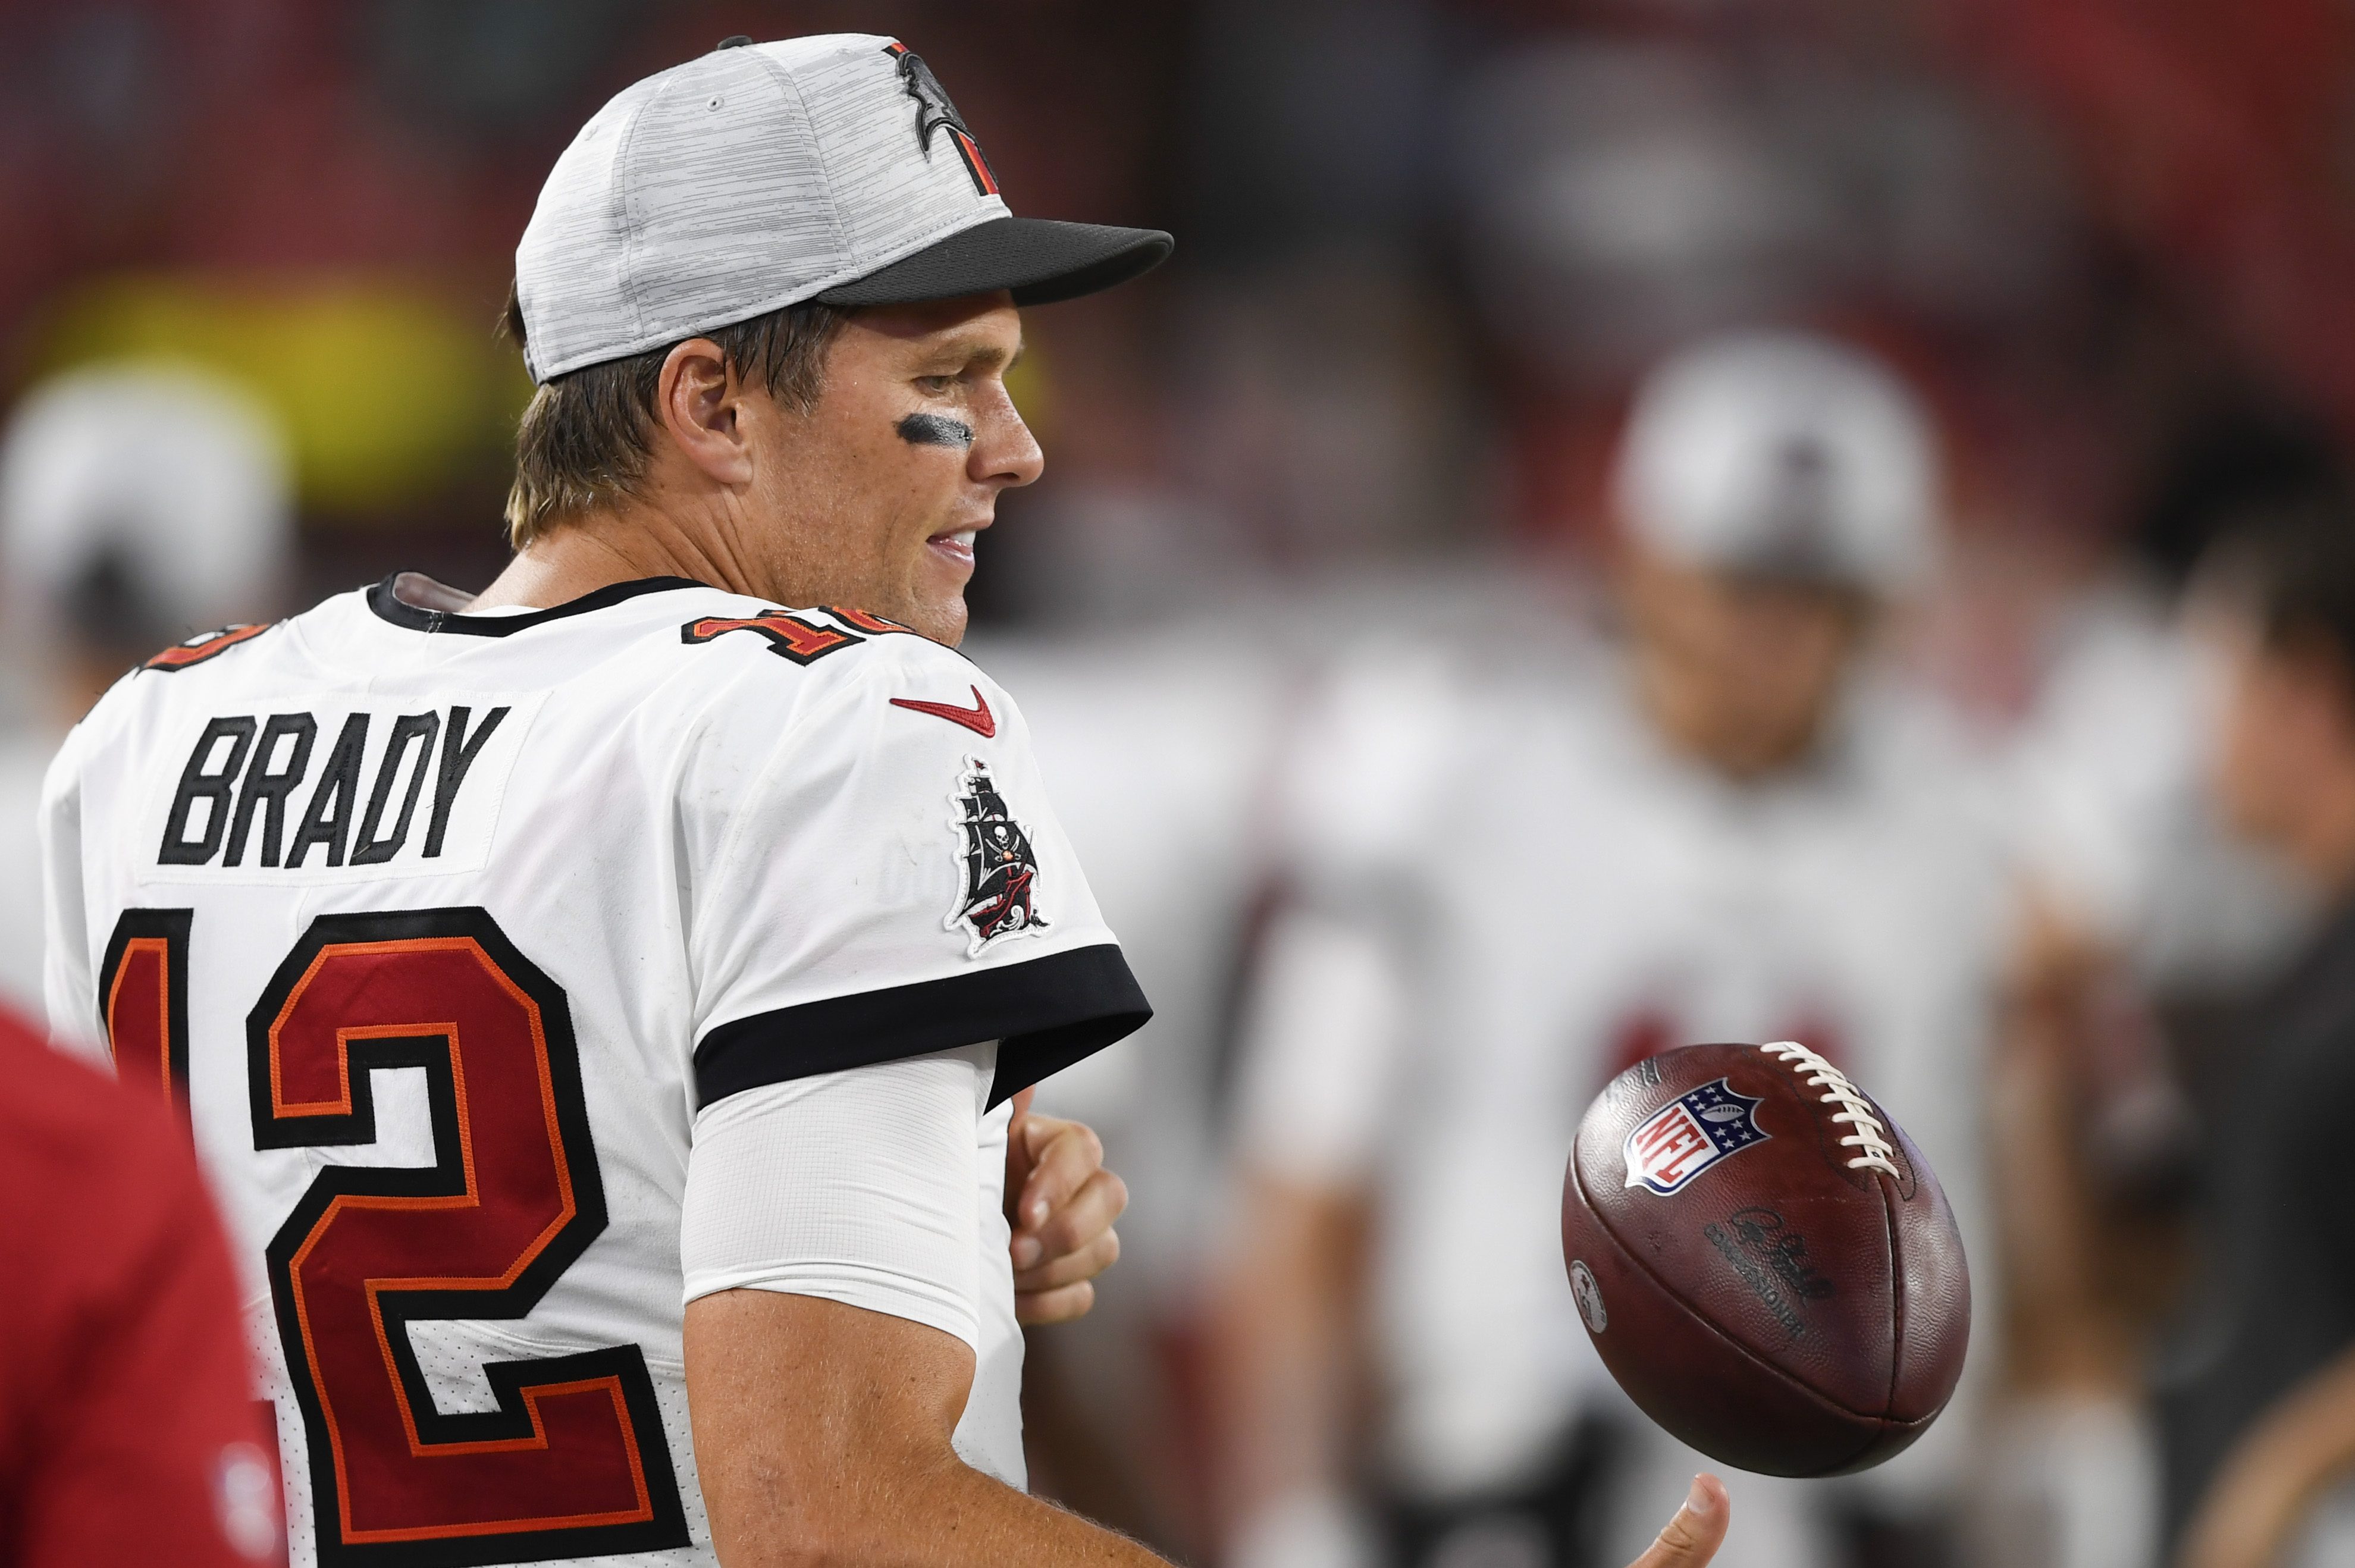 A Tom Brady Buccaneers jersey? Reported deal gives QB's apparel